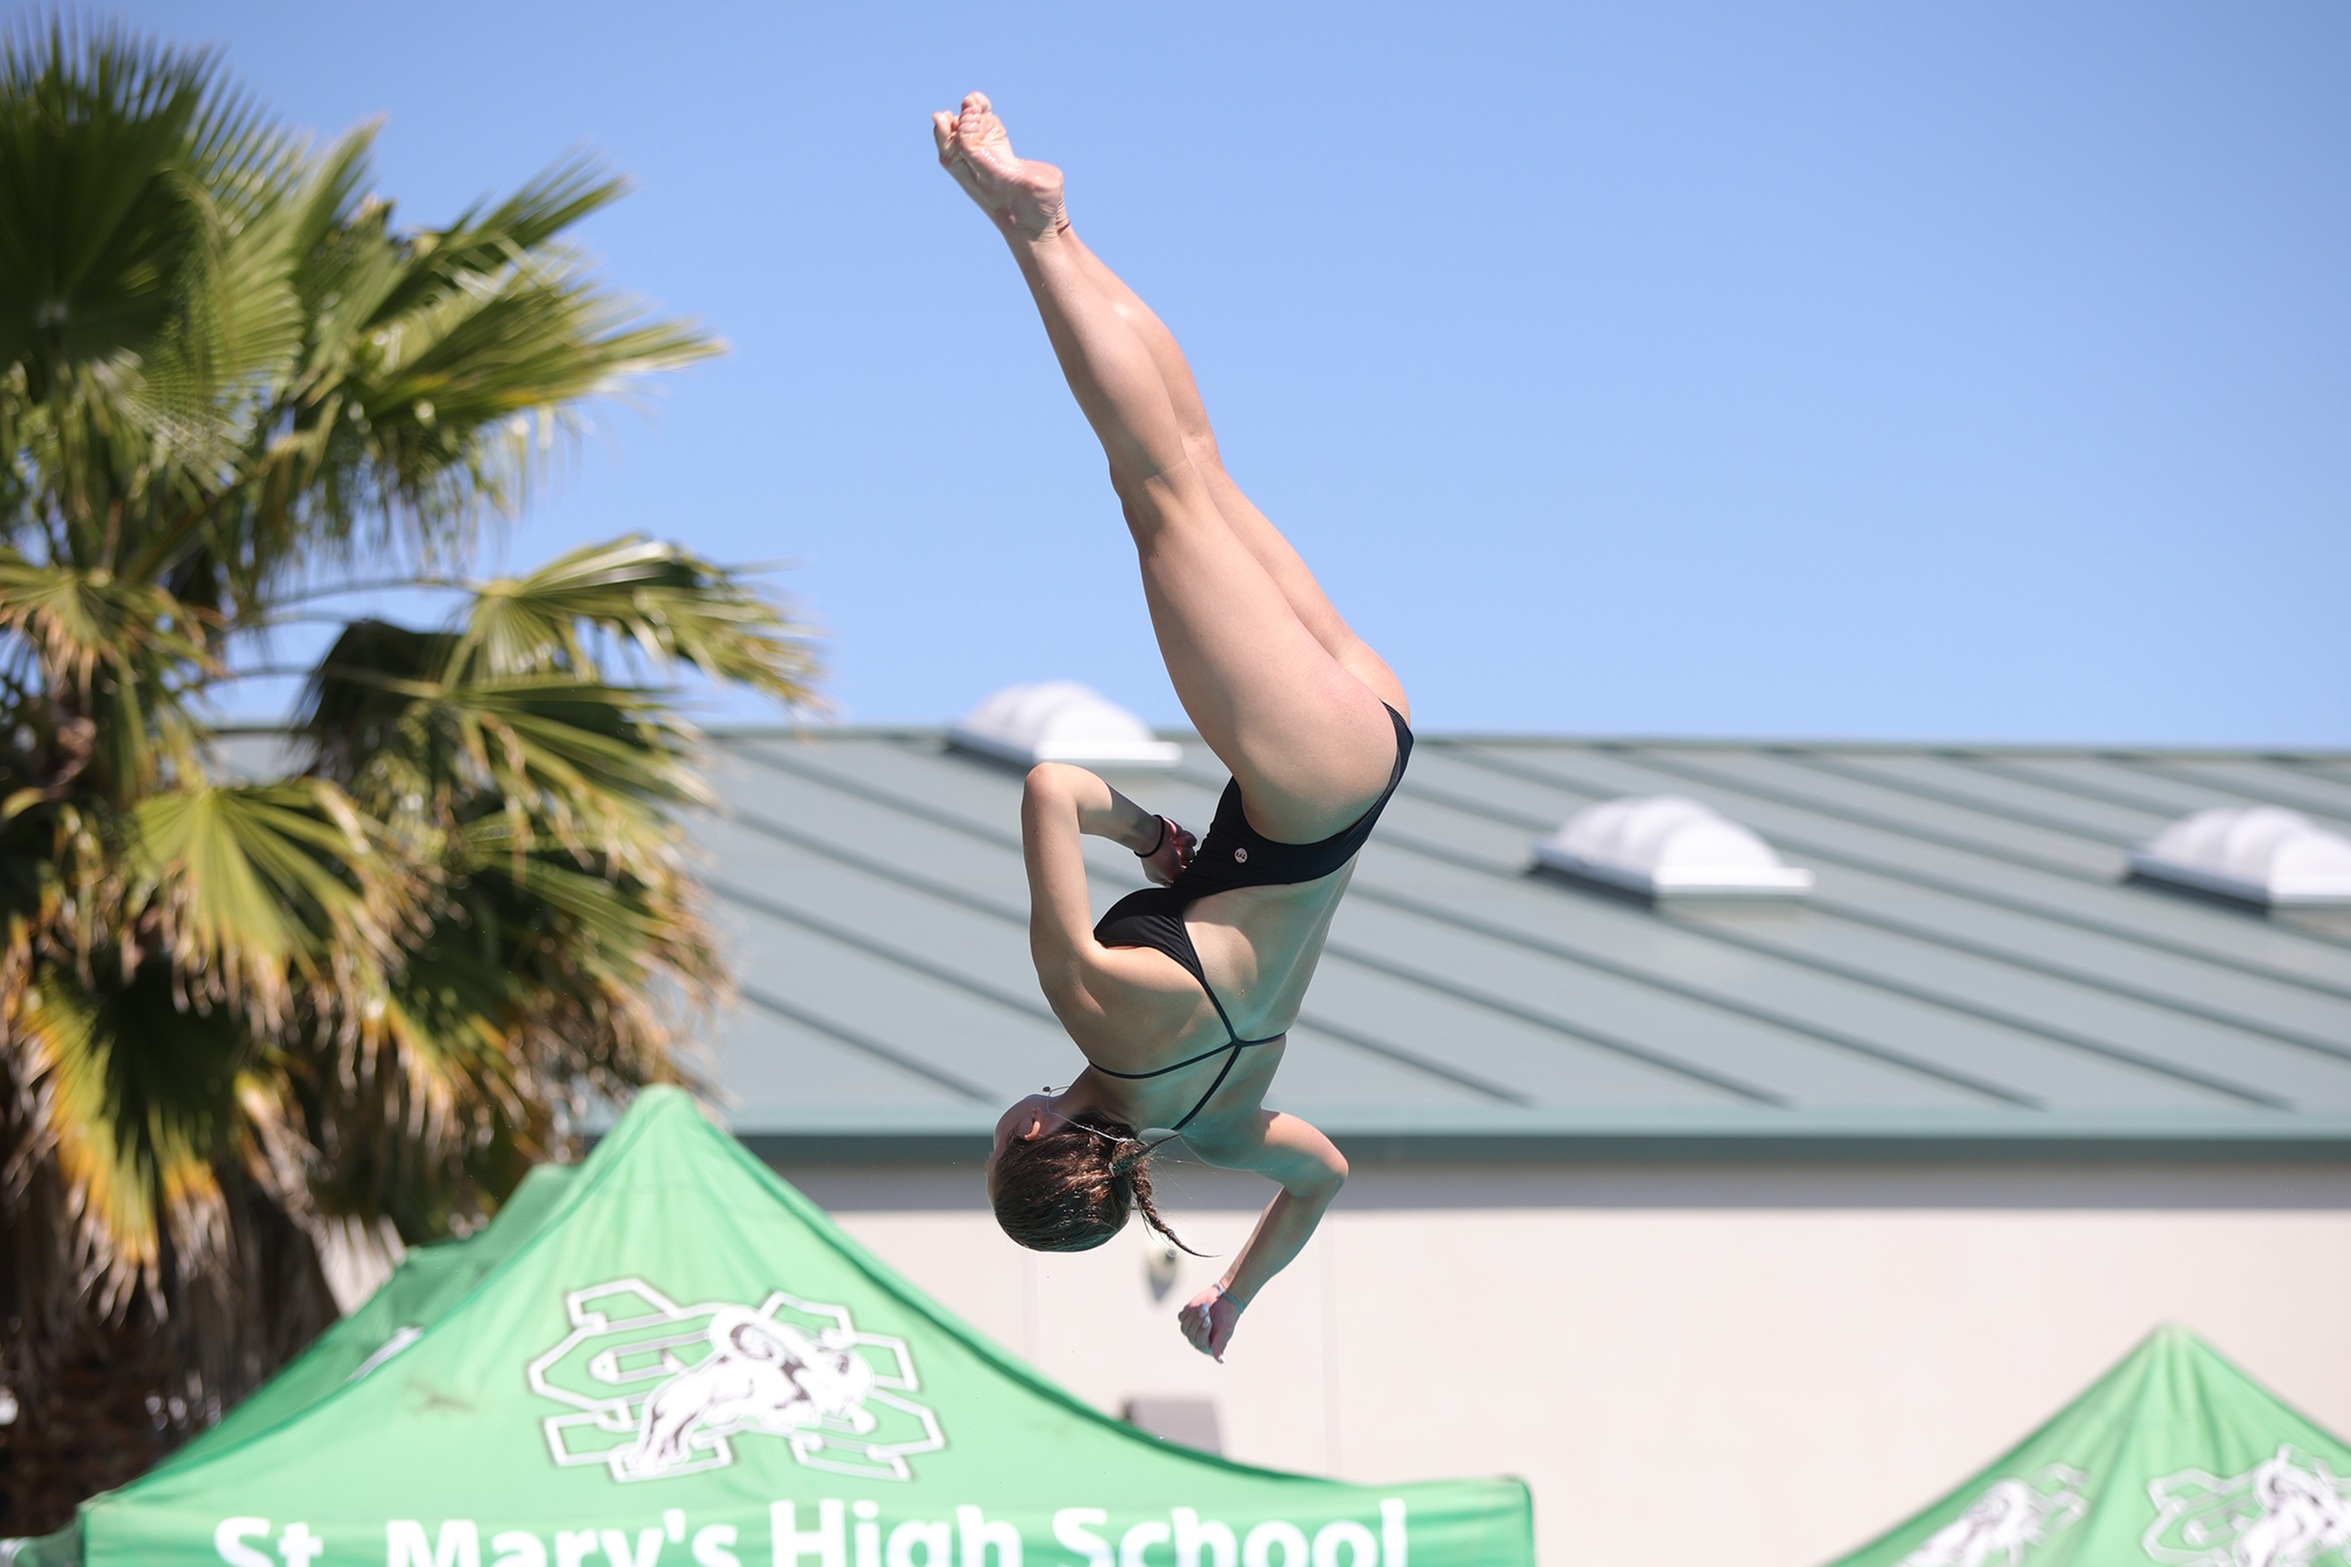 Yadao, Vicente score team points at SJS diving